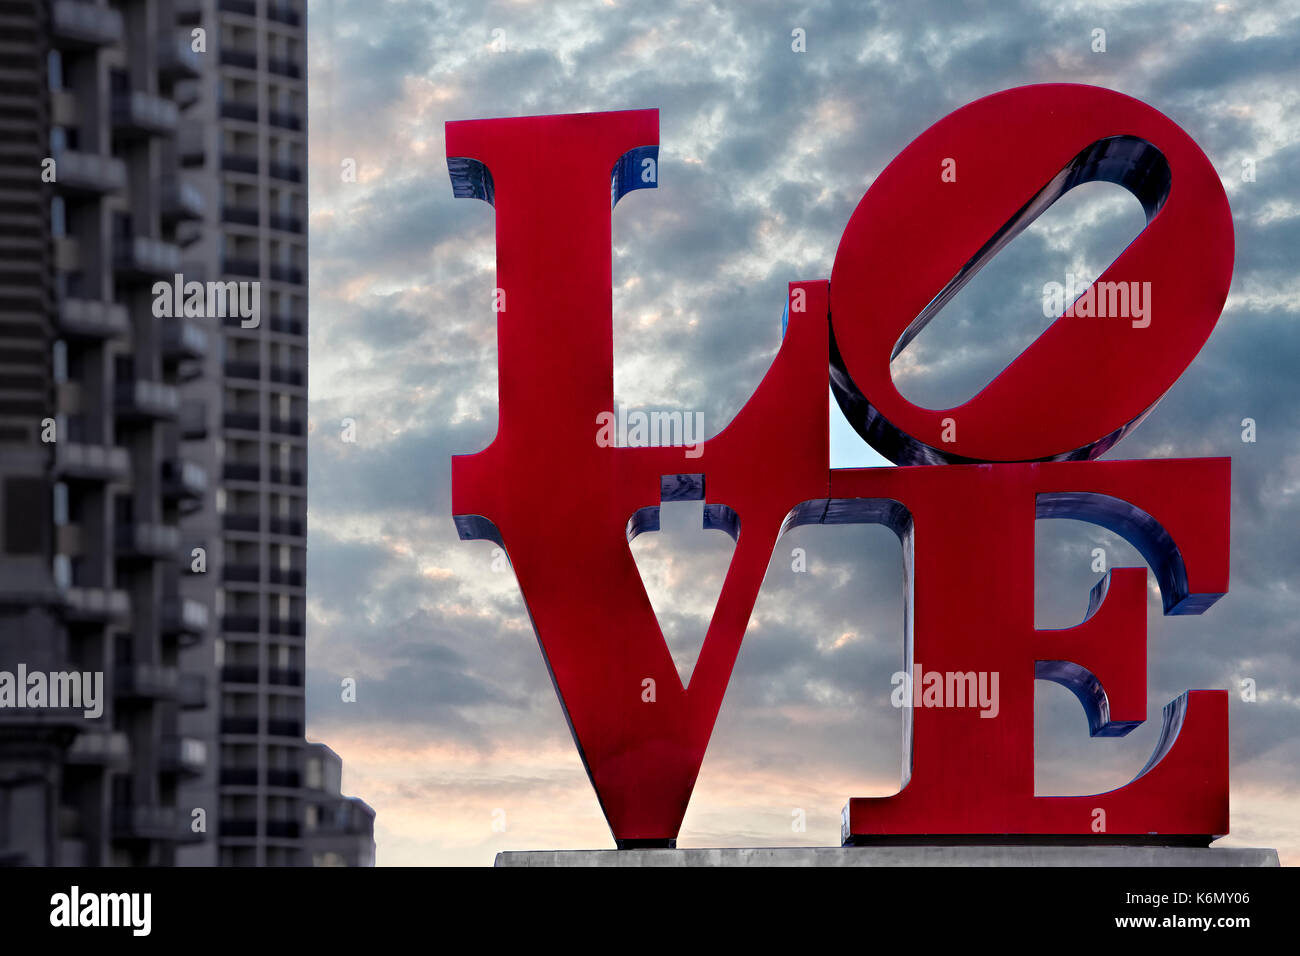 Love Park  - Love sign at the Love Park officially named the John F. Kennedy Plaza located in Center City, Pennsylvania. The park is dedicated to the late United States president John F. Kennedy. Stock Photo